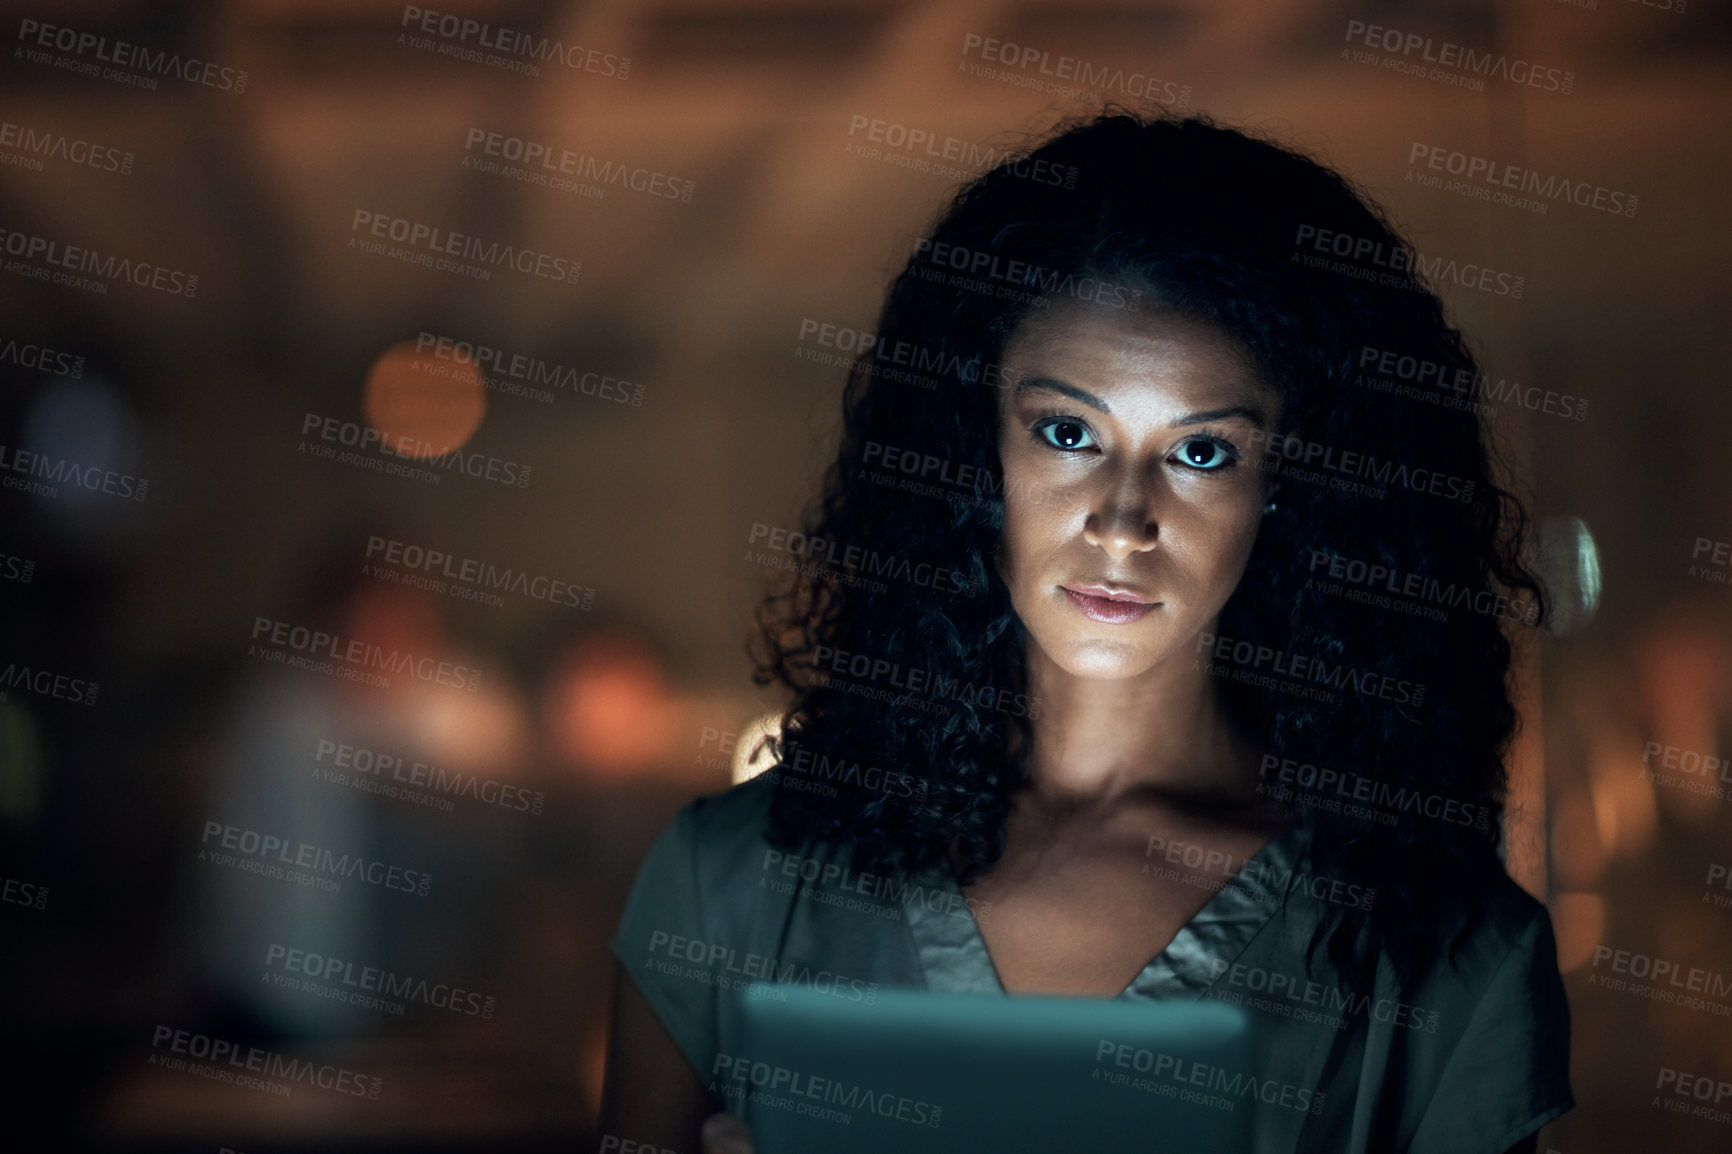 Buy stock photo Shot of a young businesswoman using a digital tablet during a late night at work